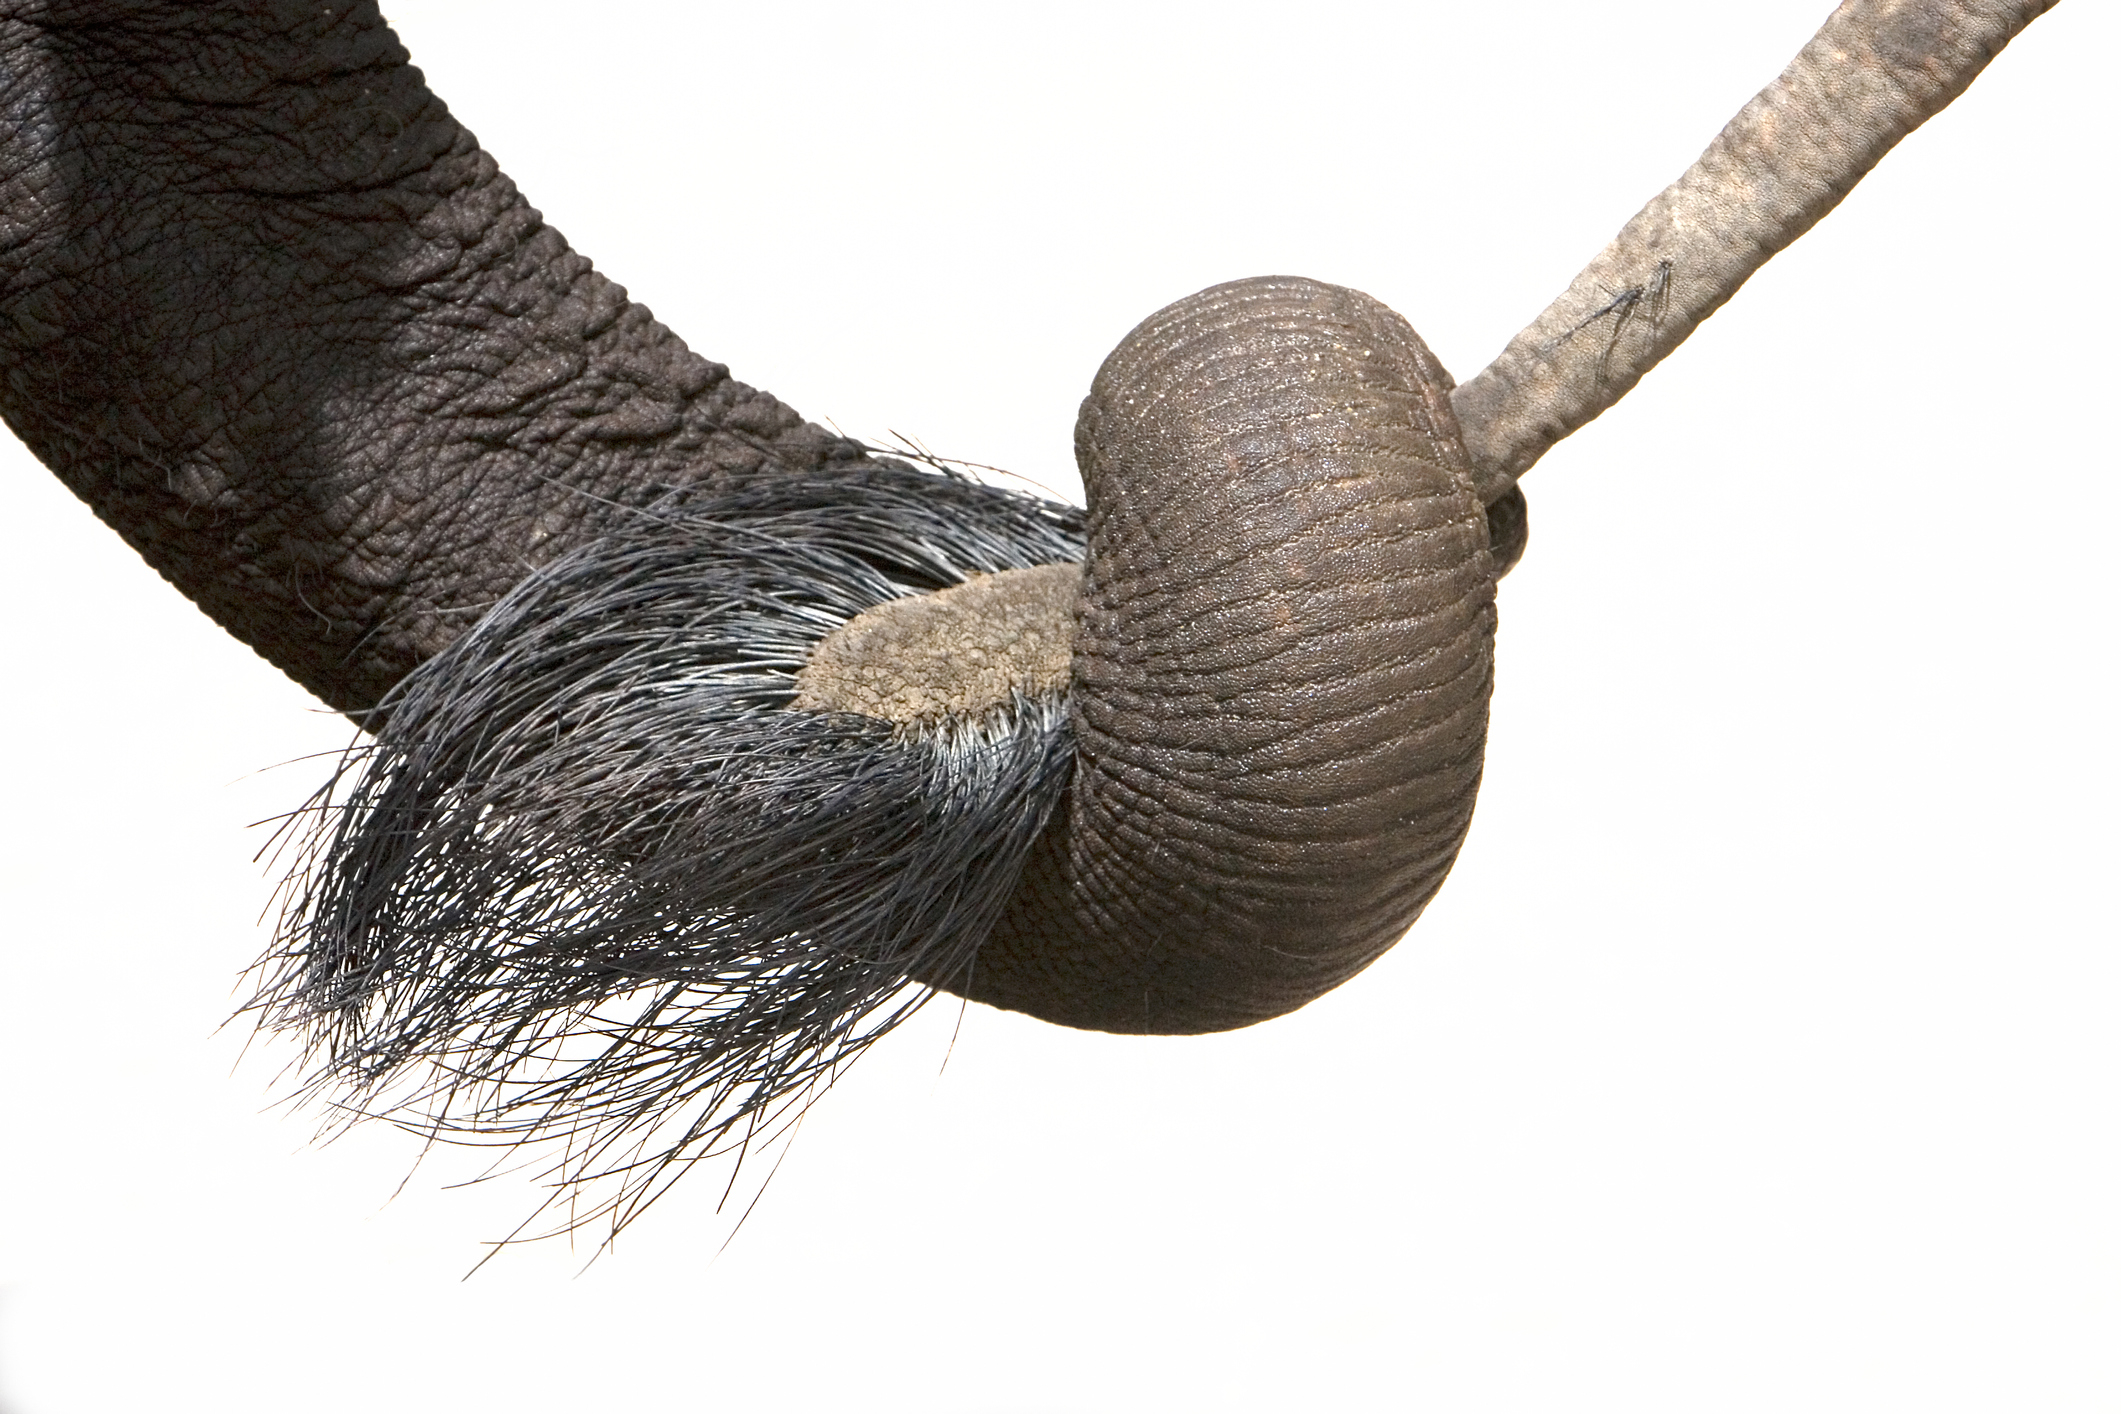 An elephant nose and tail